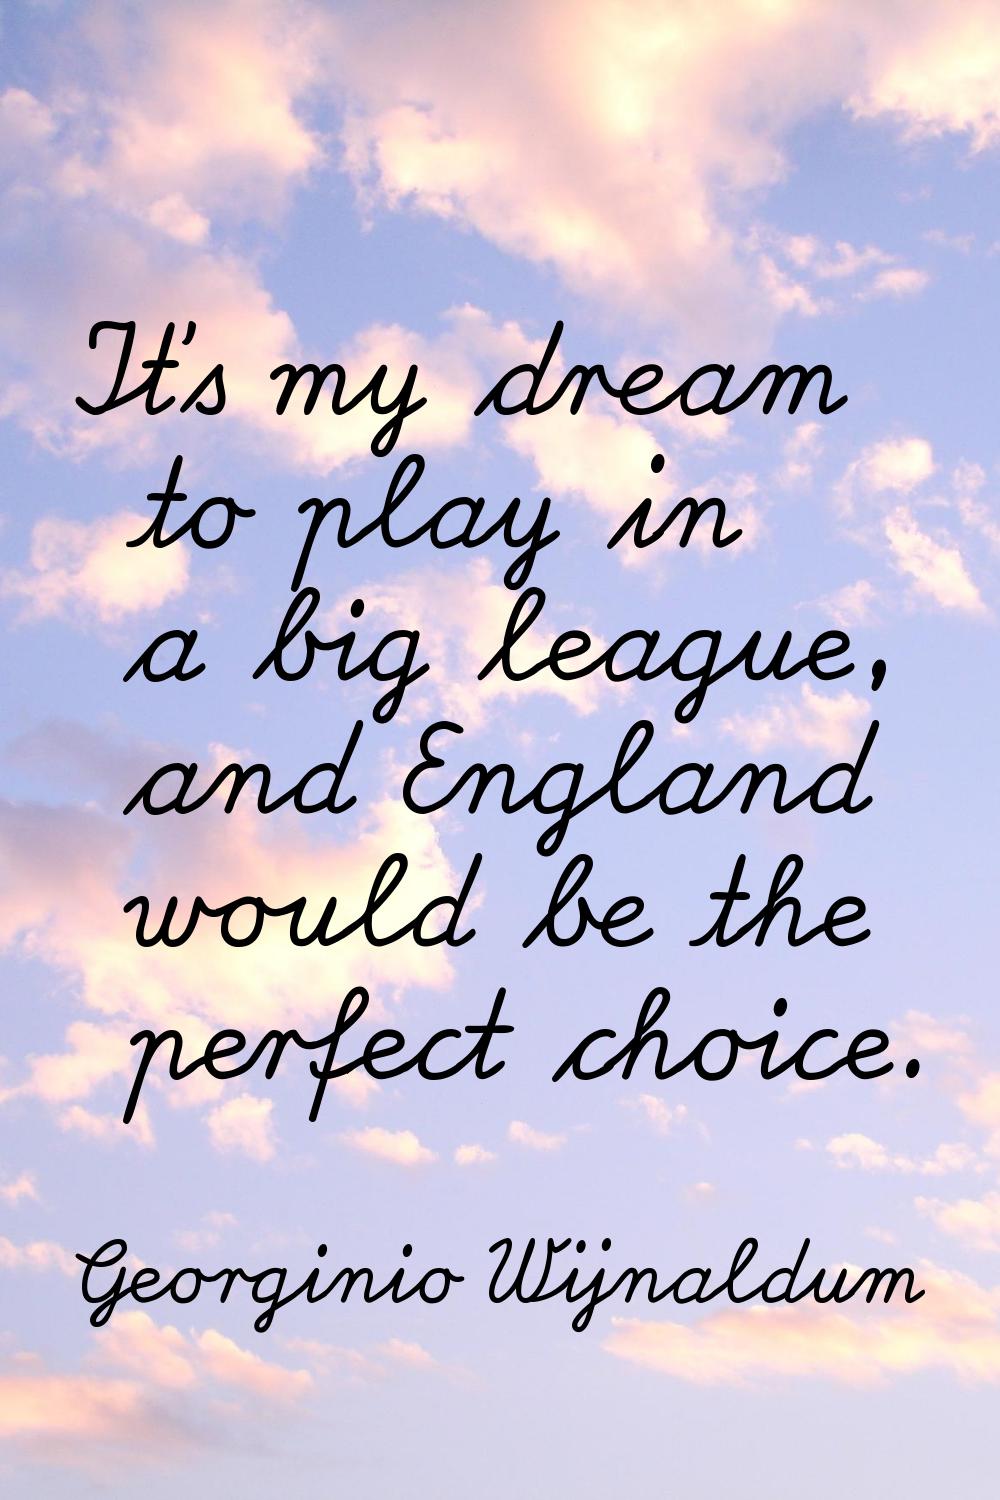 It's my dream to play in a big league, and England would be the perfect choice.